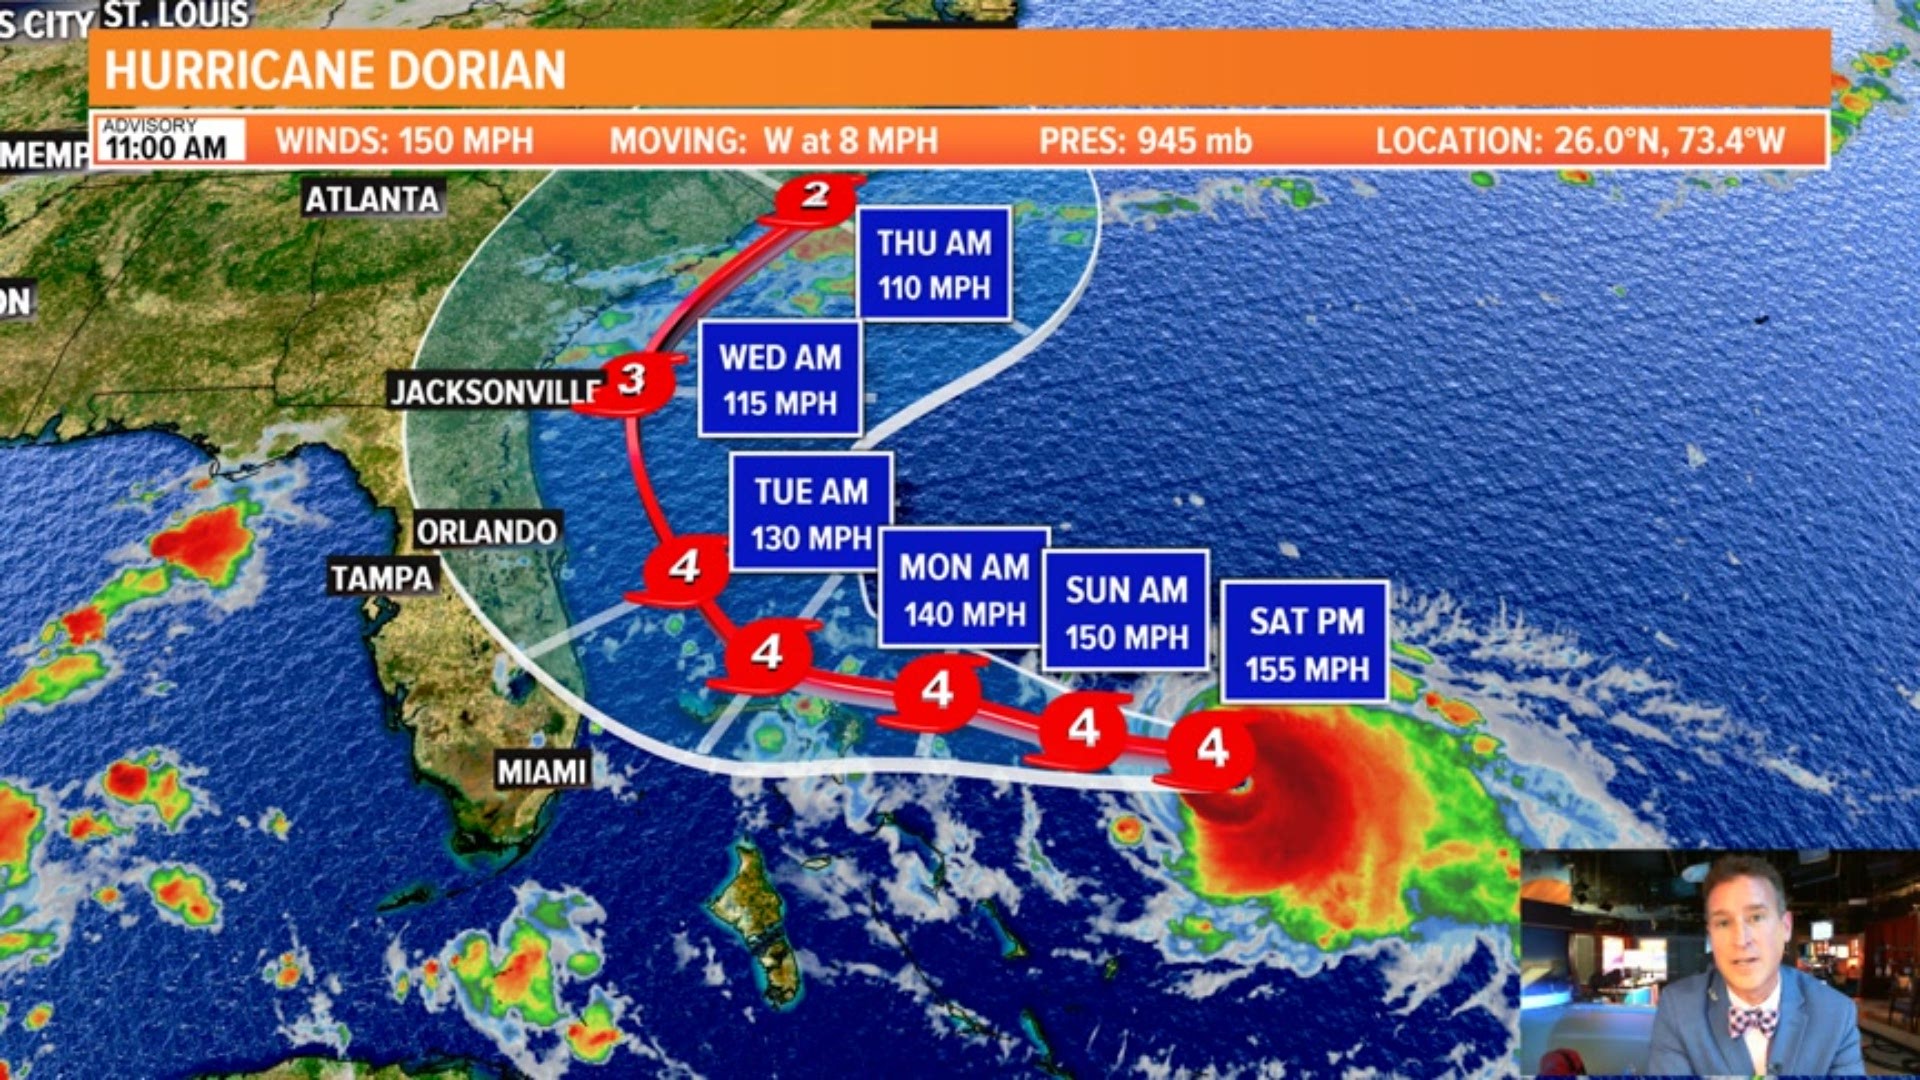 Here's the latest on Hurricane Dorian's path approaching Florida